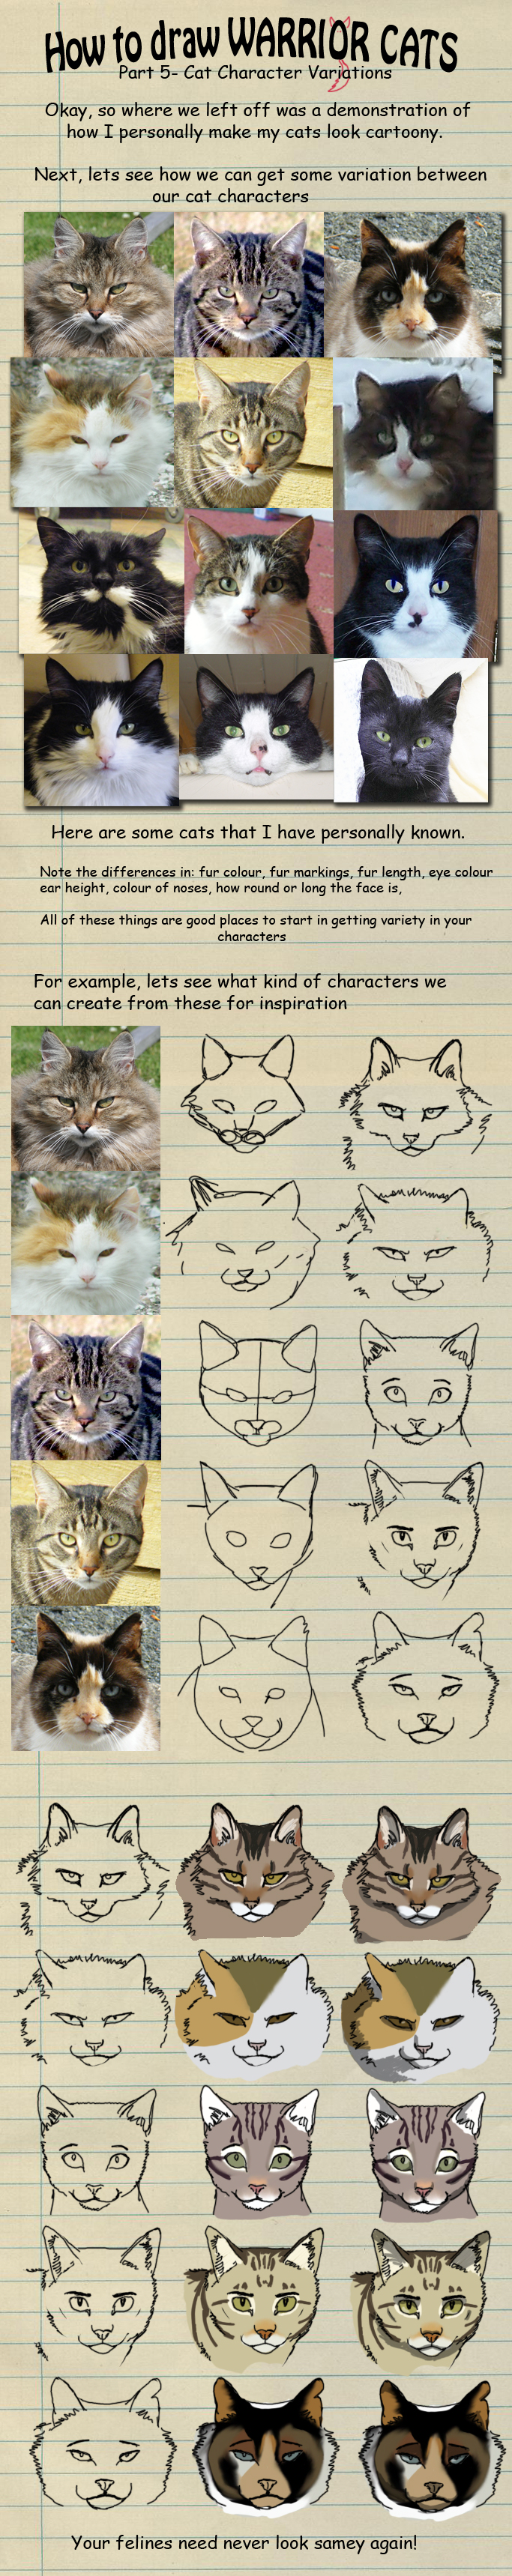 Warrior Cats Drawing - How To Draw Warrior Cats Step By Step